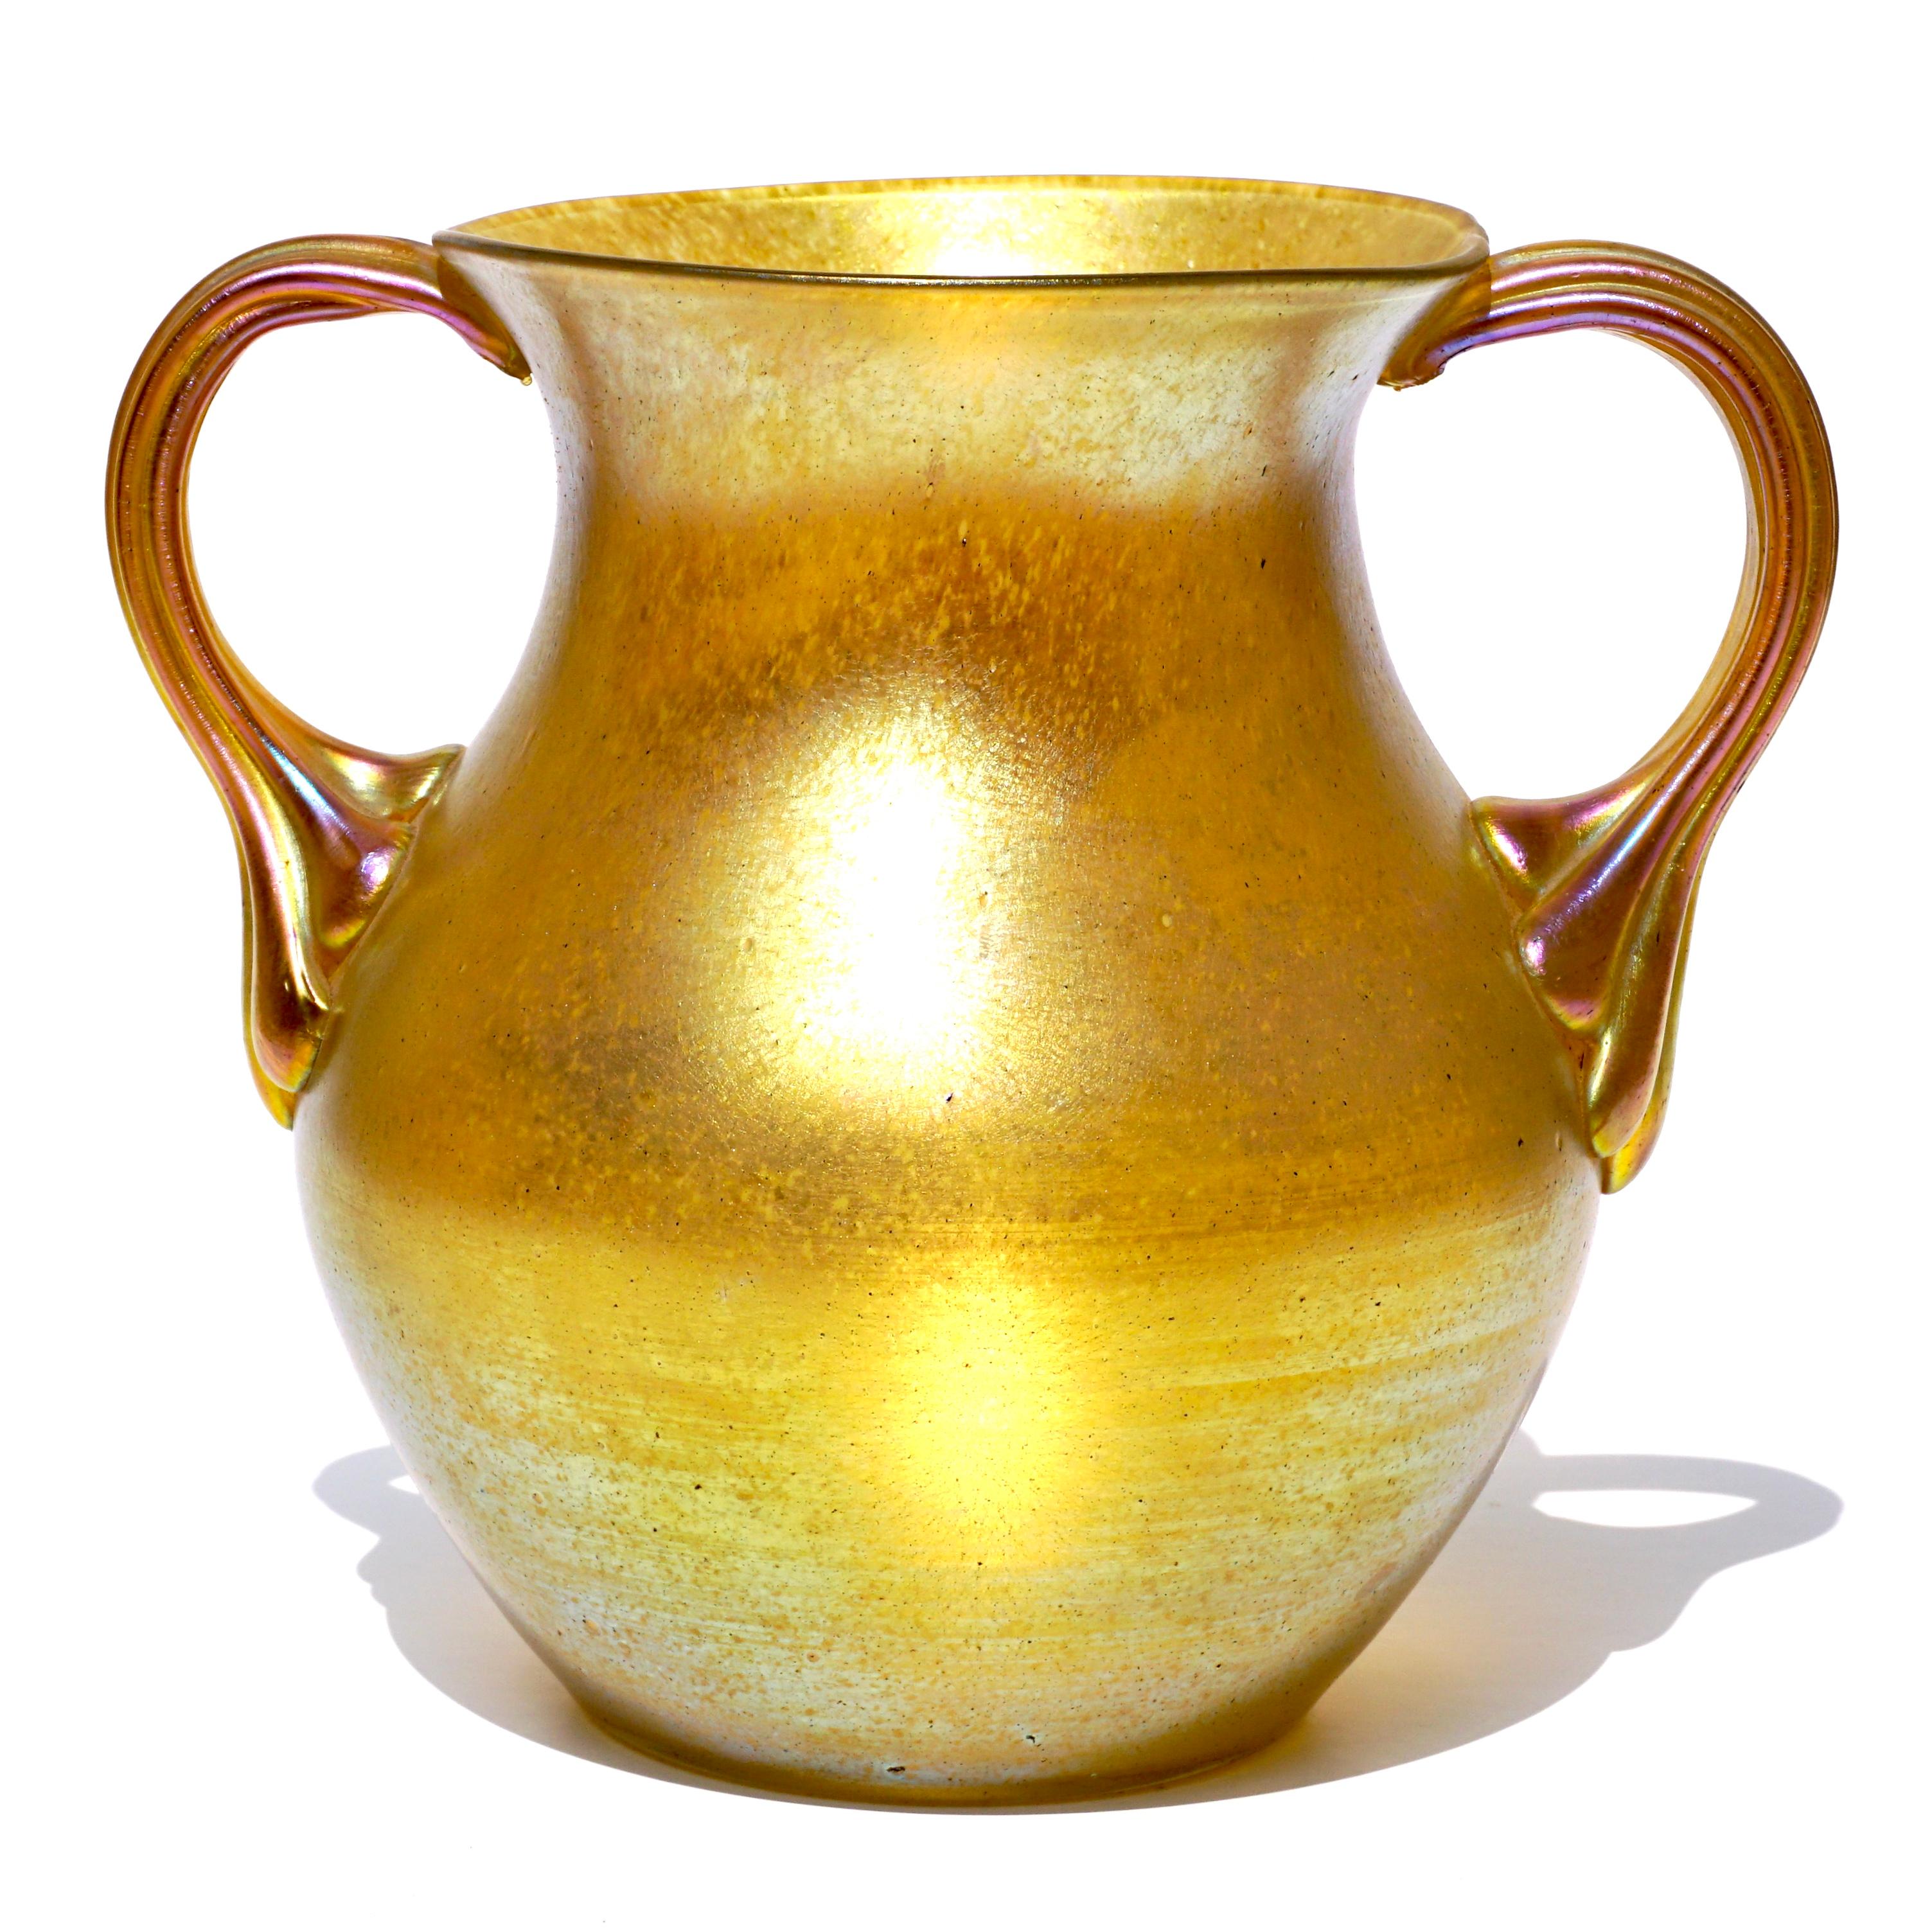 Loetz Siberiris iridescent gold glass vase with two ornate side handles, A rather large decorative vase that was the inspiration for Louis Comfort Tiffany to develope his famous Gold Favrile glass.
Height: 7.5 Inches high x 8 inch width
Condition: